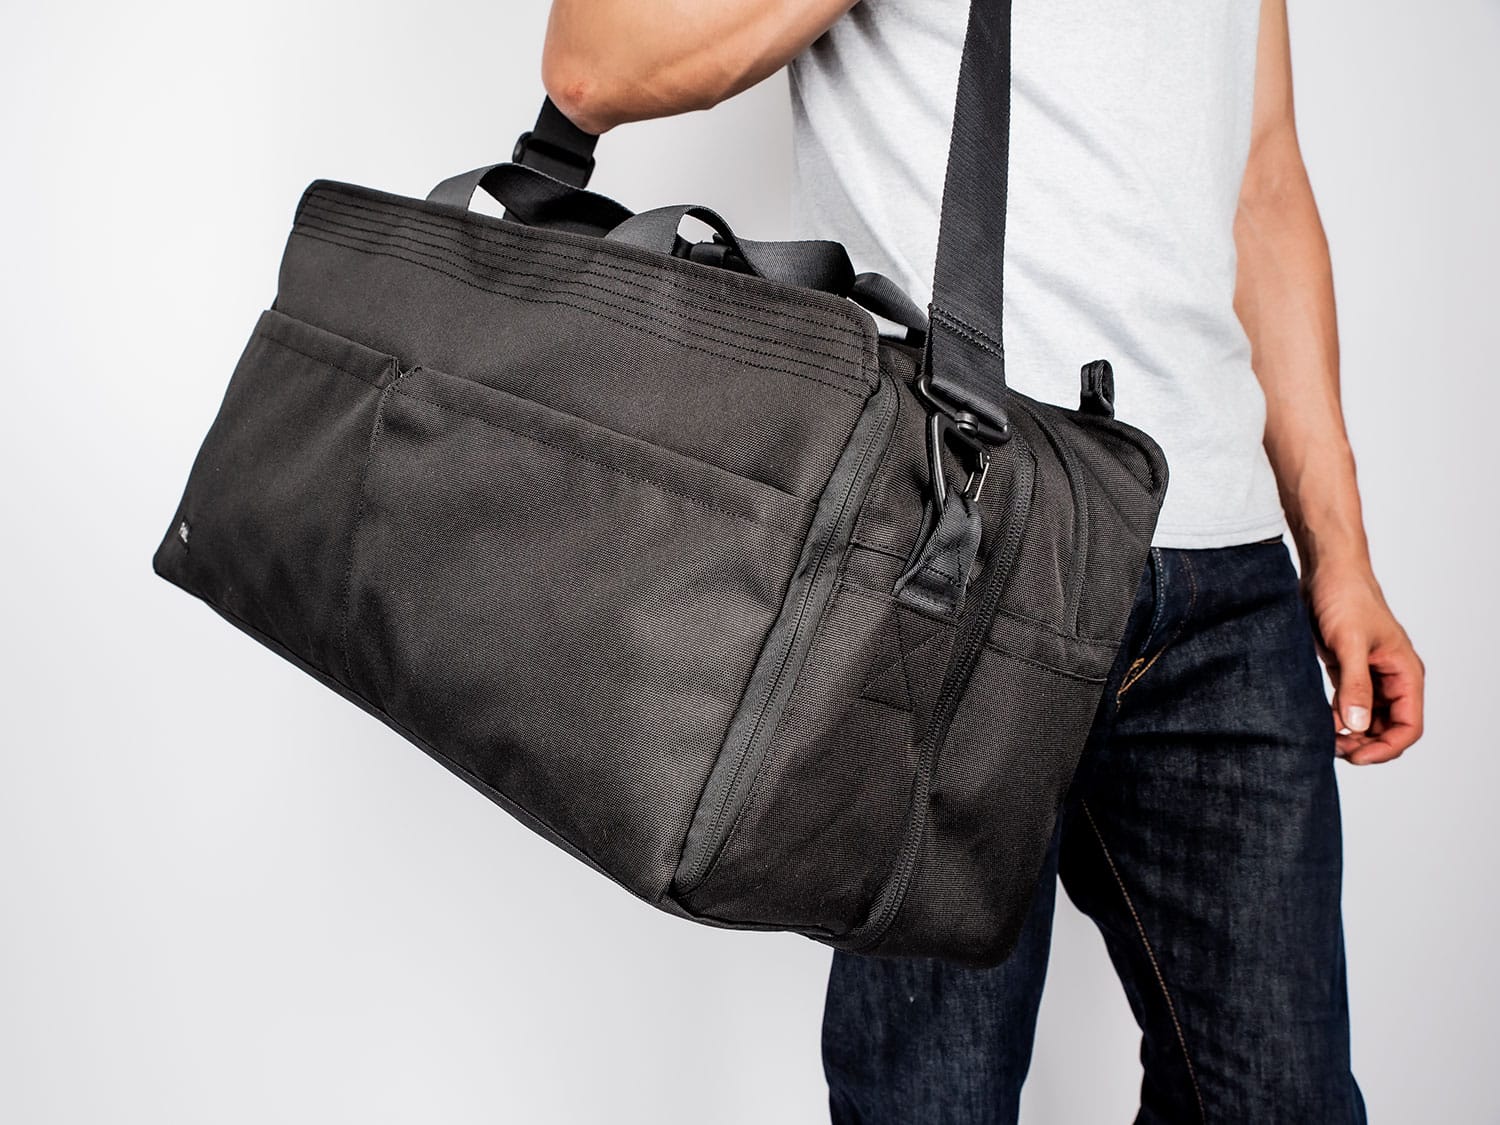 Pakt Anywhere Collection travel bag.